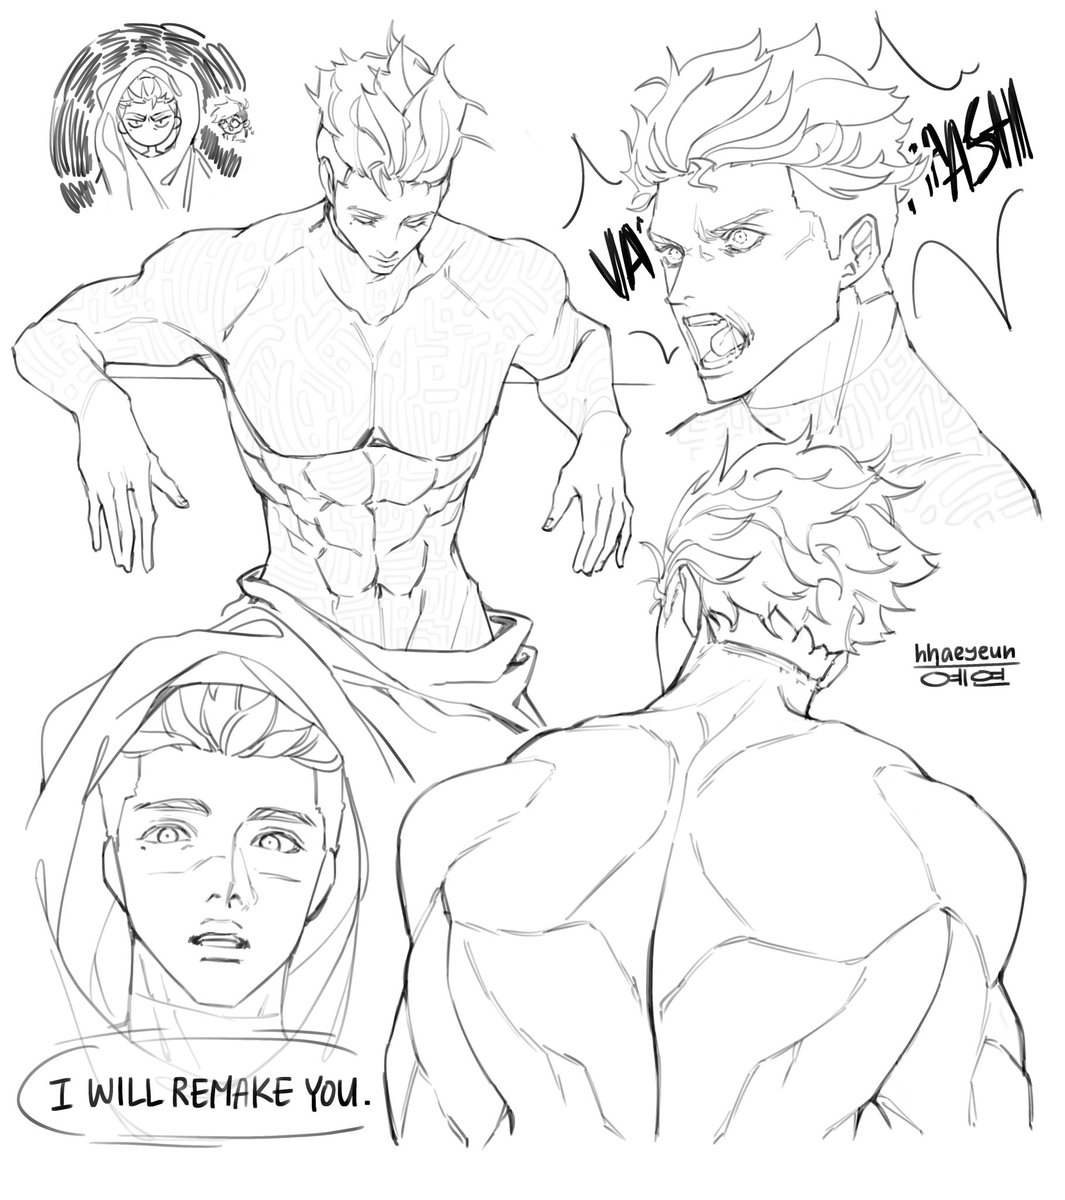 knives sketchpage. i think about him a normal amount. no seriously. im being for real. he's so n 
#knivesmillions #TRIGUNイラコン #TRIGUNSTAMPEDE #trigun 